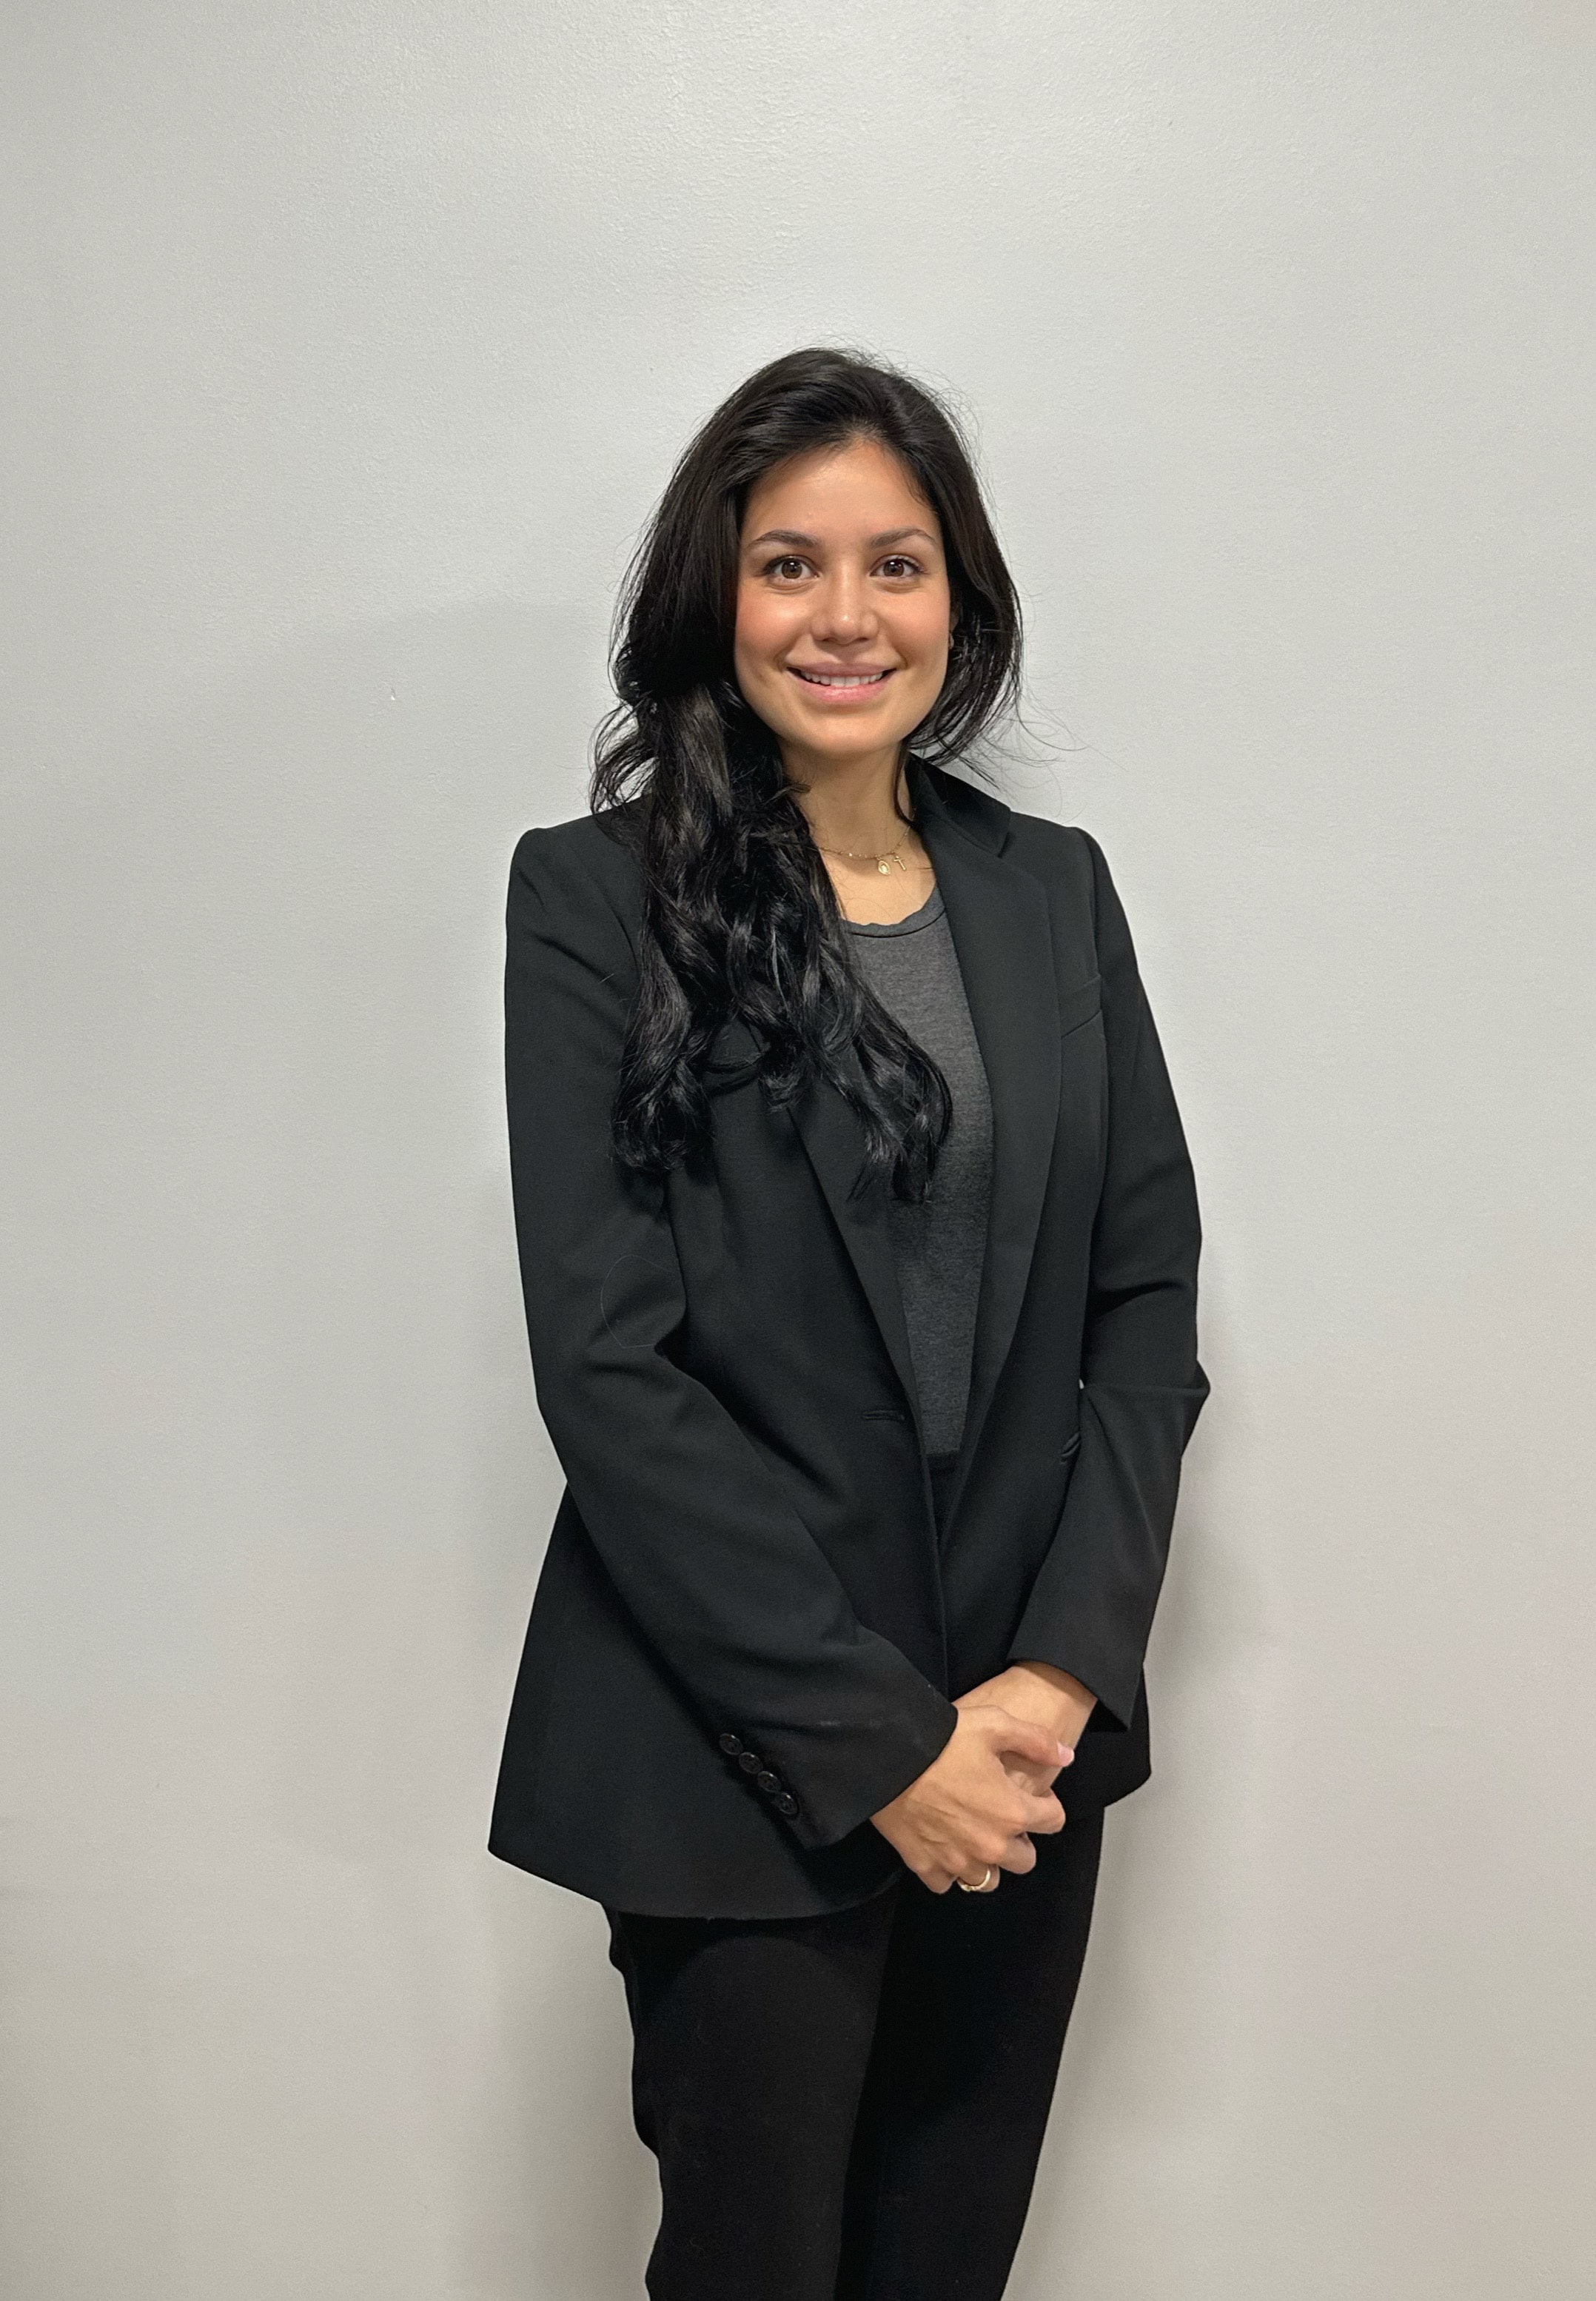 Lorely Bracho Immigration Attorney At The Medlin Law Firm			 - Photos of Our Business -  The Medlin Law Firm